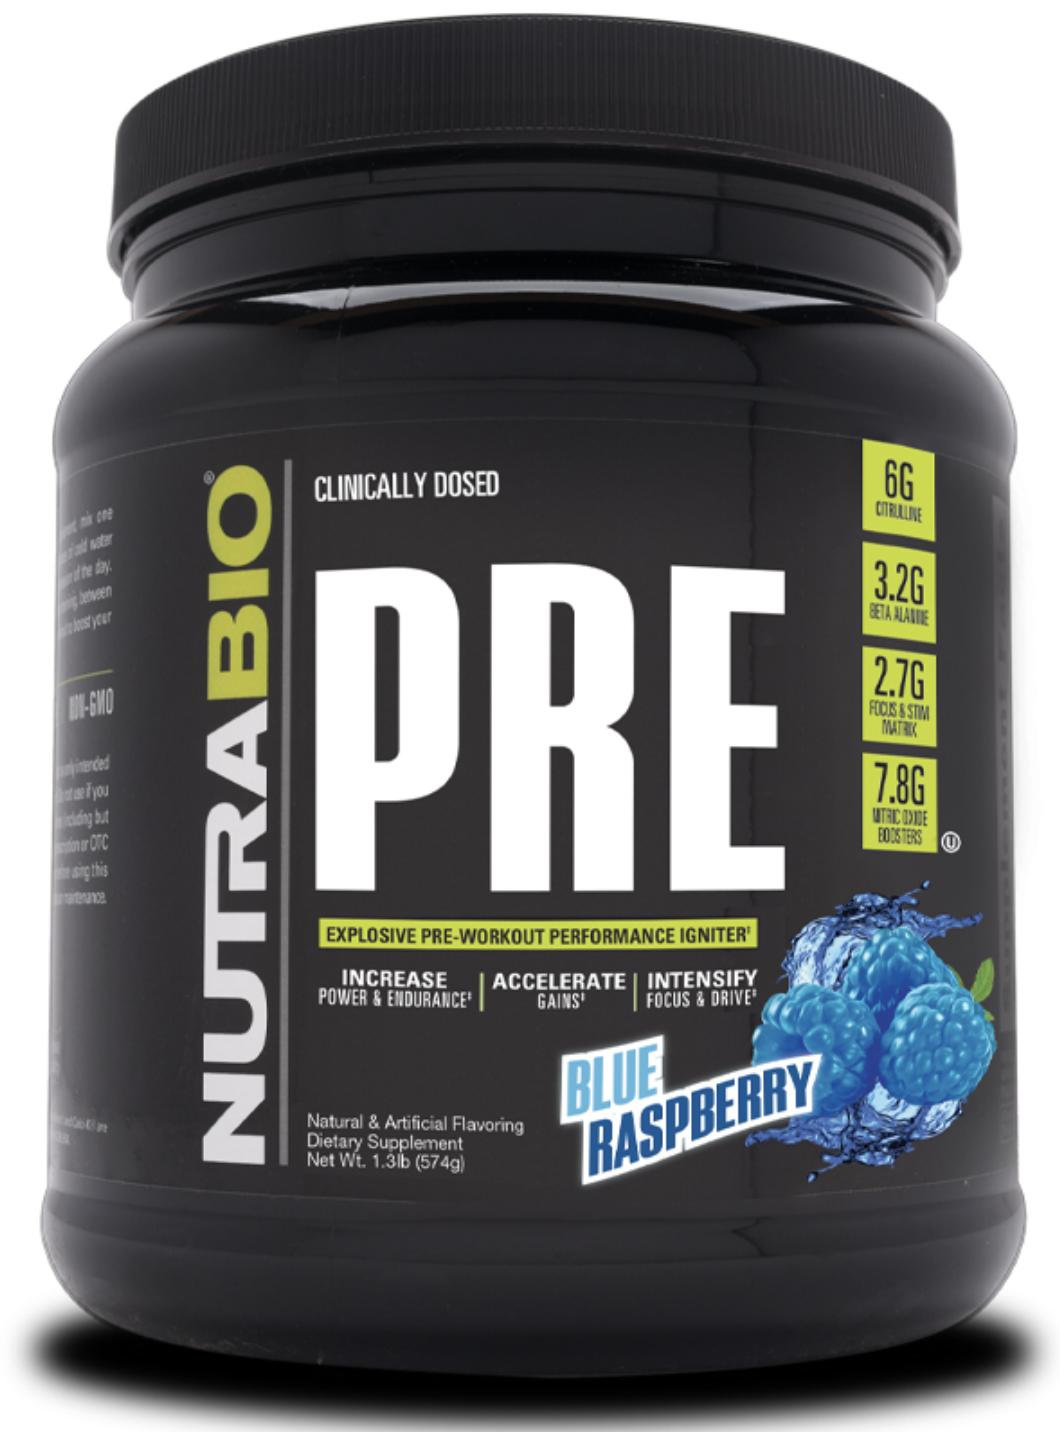 6 Day Progressive pre workout review for Fat Body